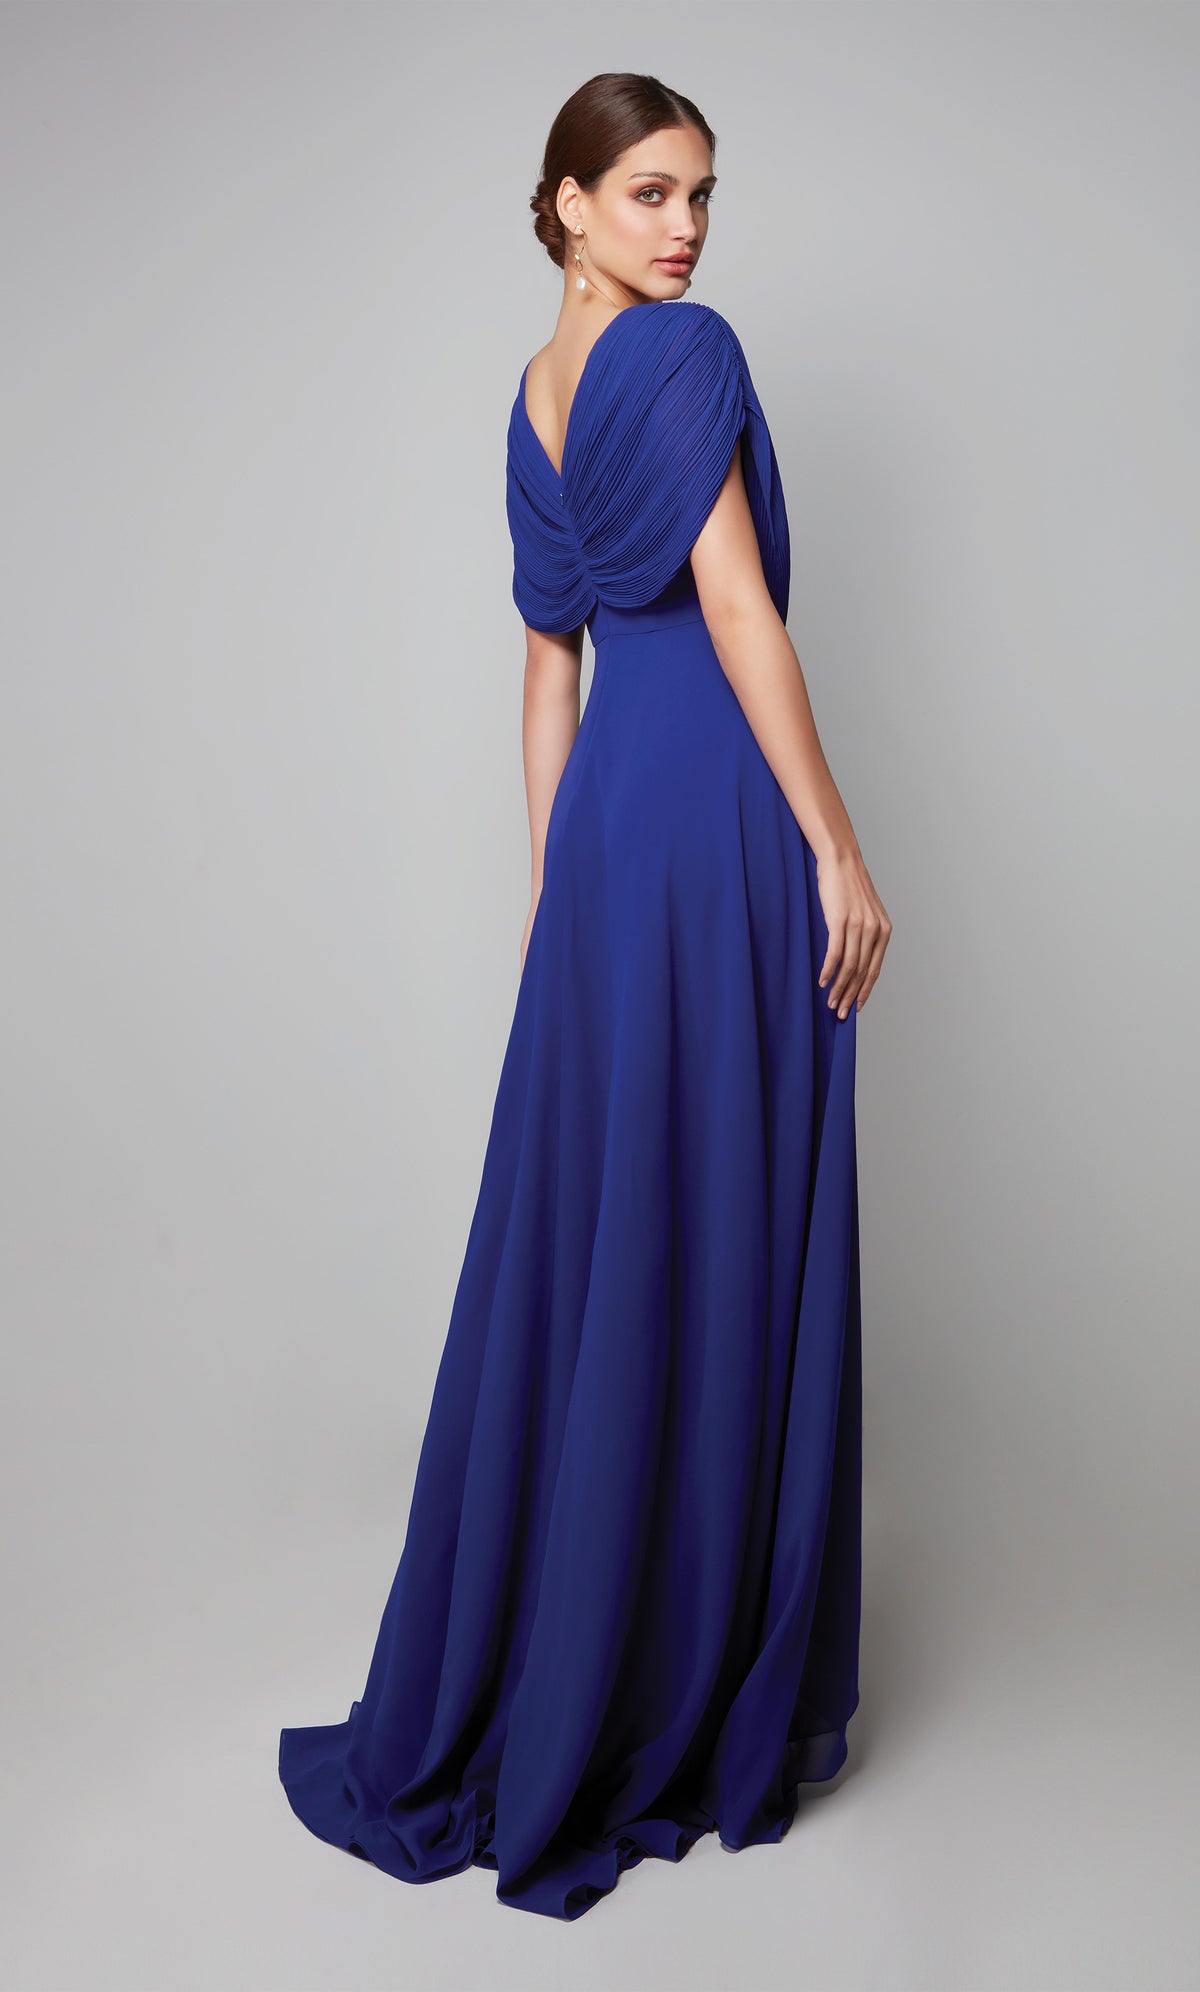 Flowy chiffon gown with a draped top, closed back, and train in cobalt blue.